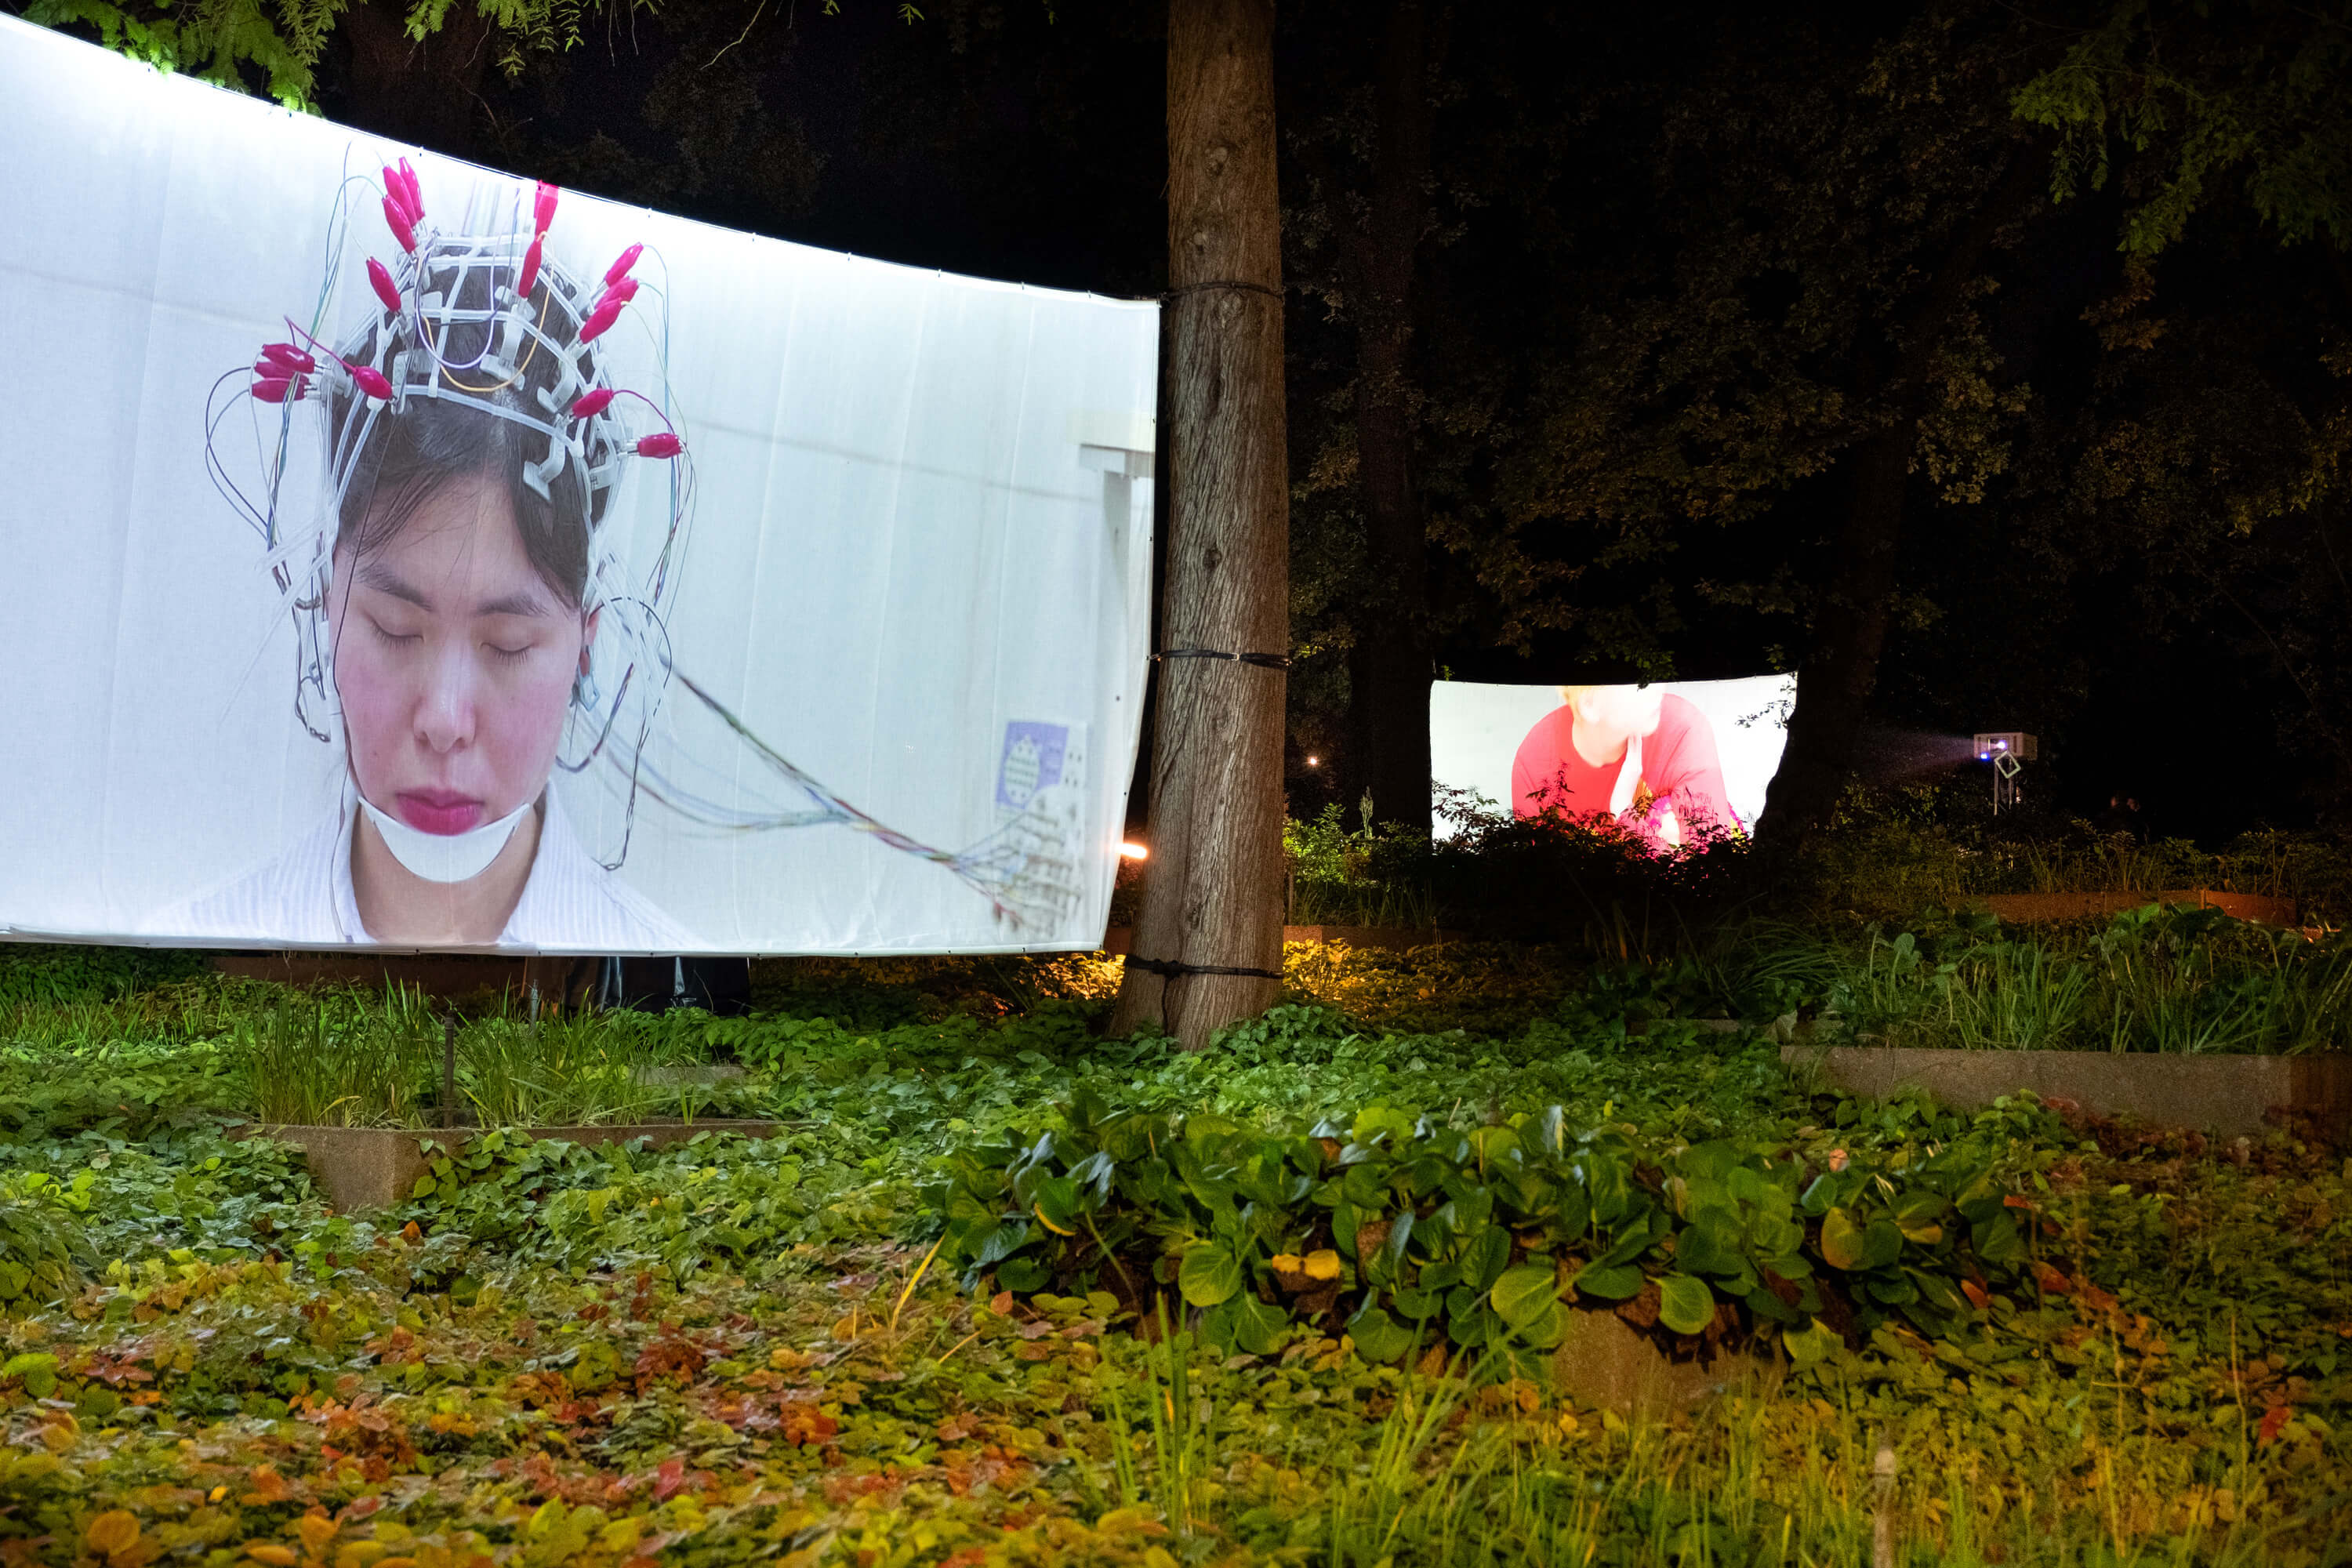 Installation at Planten un Blomen park in Hamburg by Hiền Hoàng, featuring large-scale video projections on towering trees. The immersive experience comprises three distinct screens, each showcasing a different film from the 'Scent from Heaven' project. The videos explore themes of tree’s suffering, human’s dream of healing and salvation and sensory perception, enveloping viewers in a mesmerizing blend of sight and sound amidst the natural surroundings of the park.